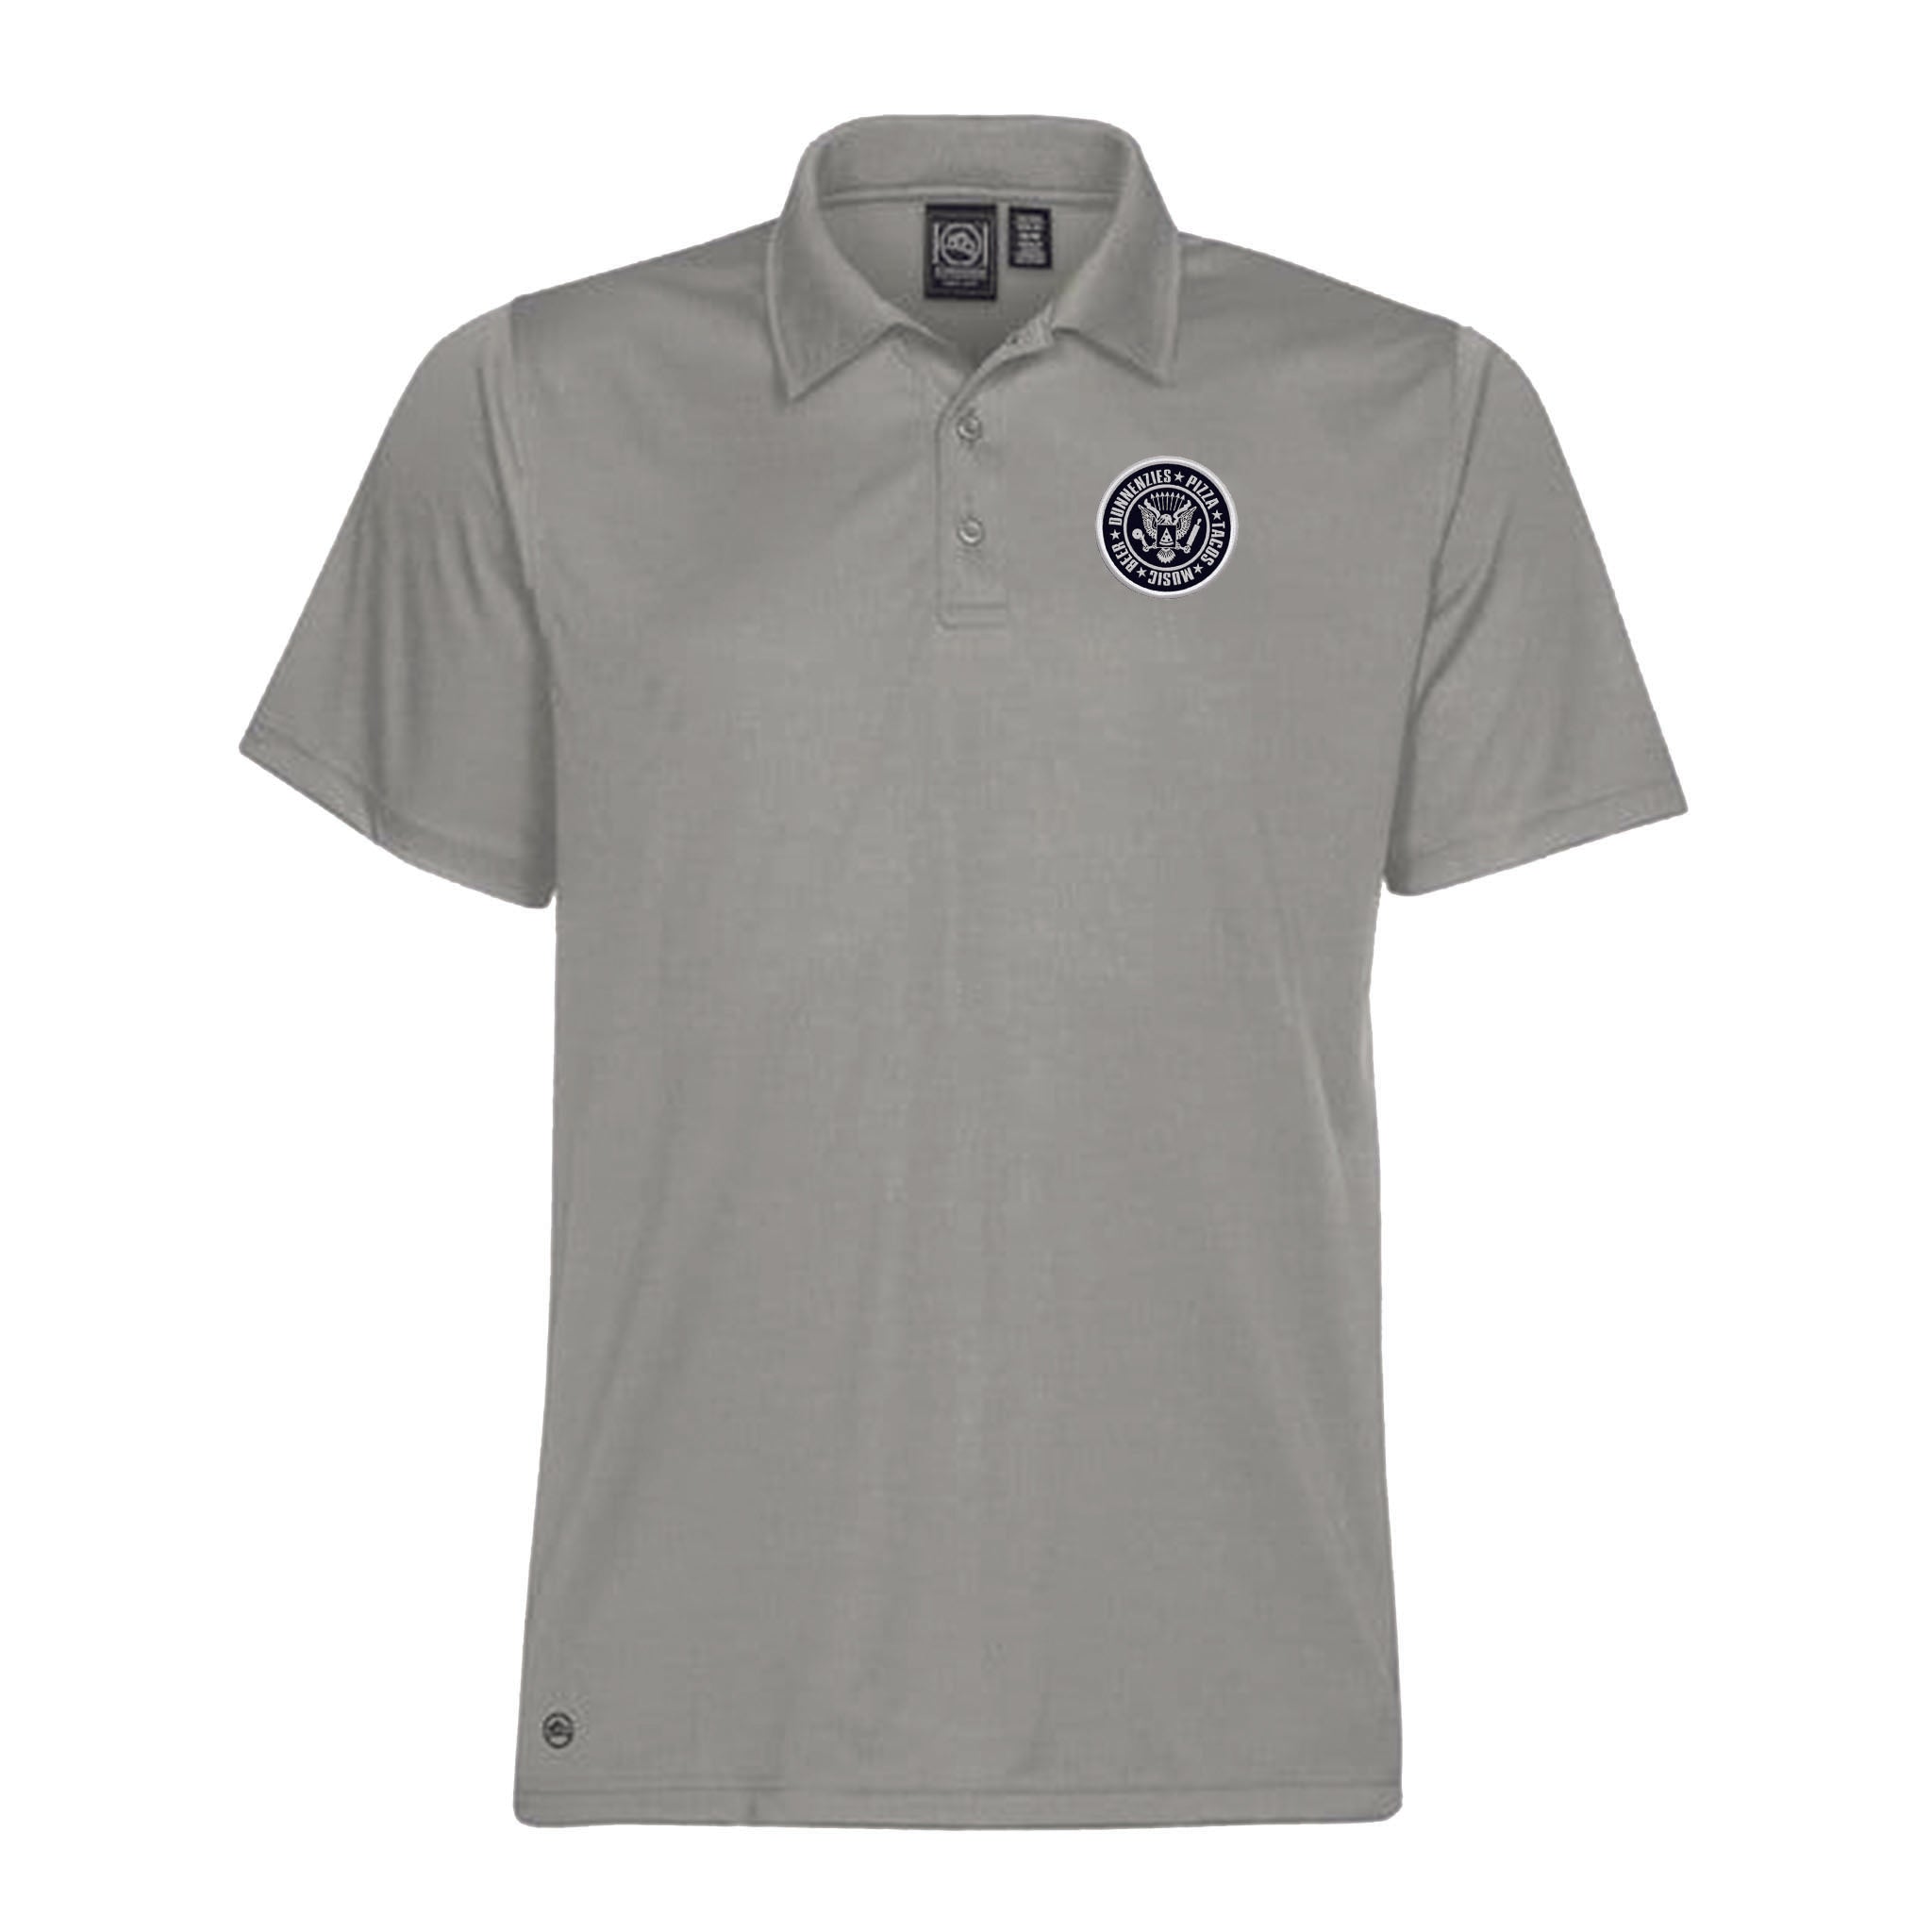 Dunnenzies Stormtech Polo - Adult Unisex Sizing XS-4XL - Silver